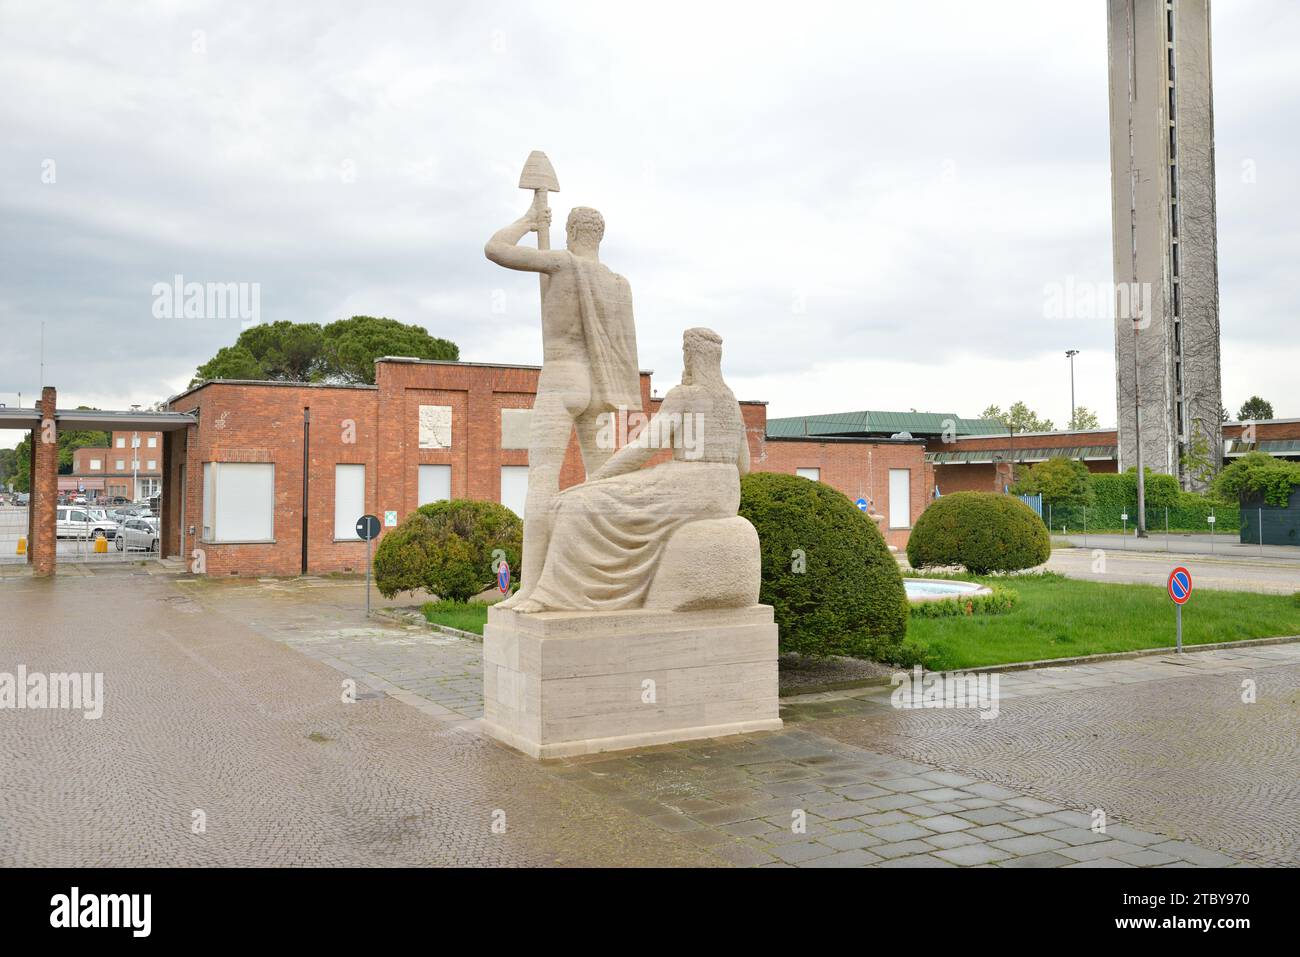 Torviscosa, Italy - The main building and rear side of statue located at the entrance Stock Photo